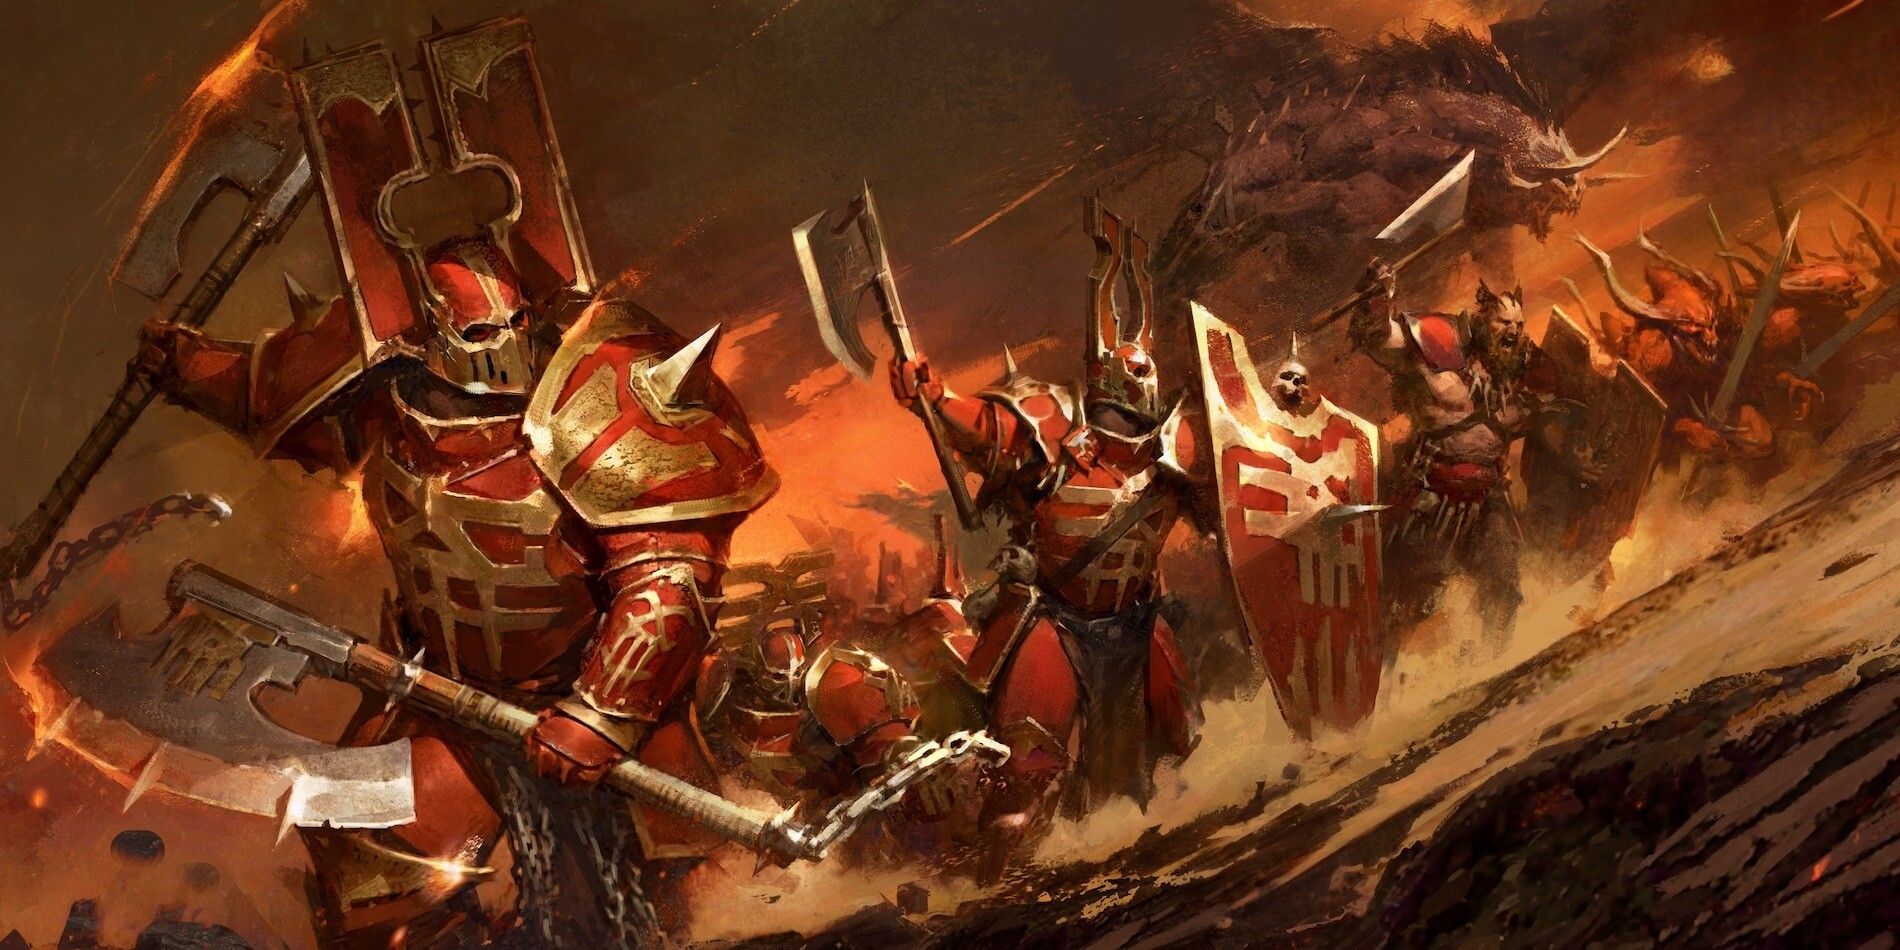 Why Khorne Is a Great First Campaign for Total War Warhammer III Beginners